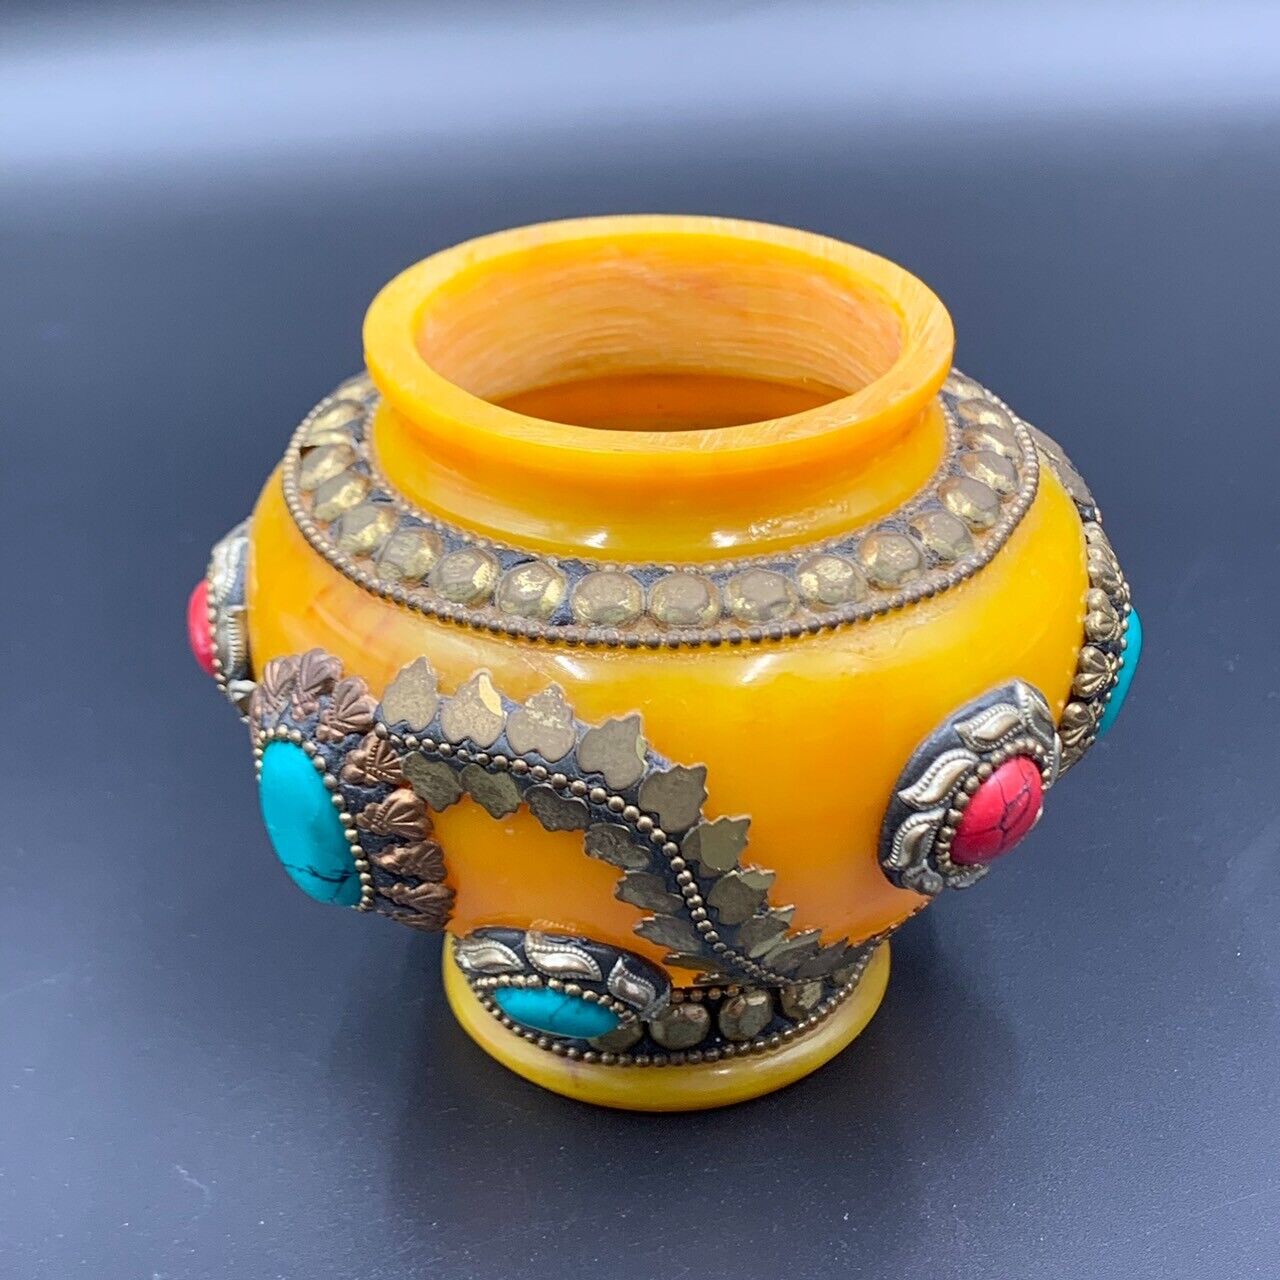 Vintage Handmade Old Nepalese Amber Jewel Jar With Agate Stones, Collectible - Image 4 of 5